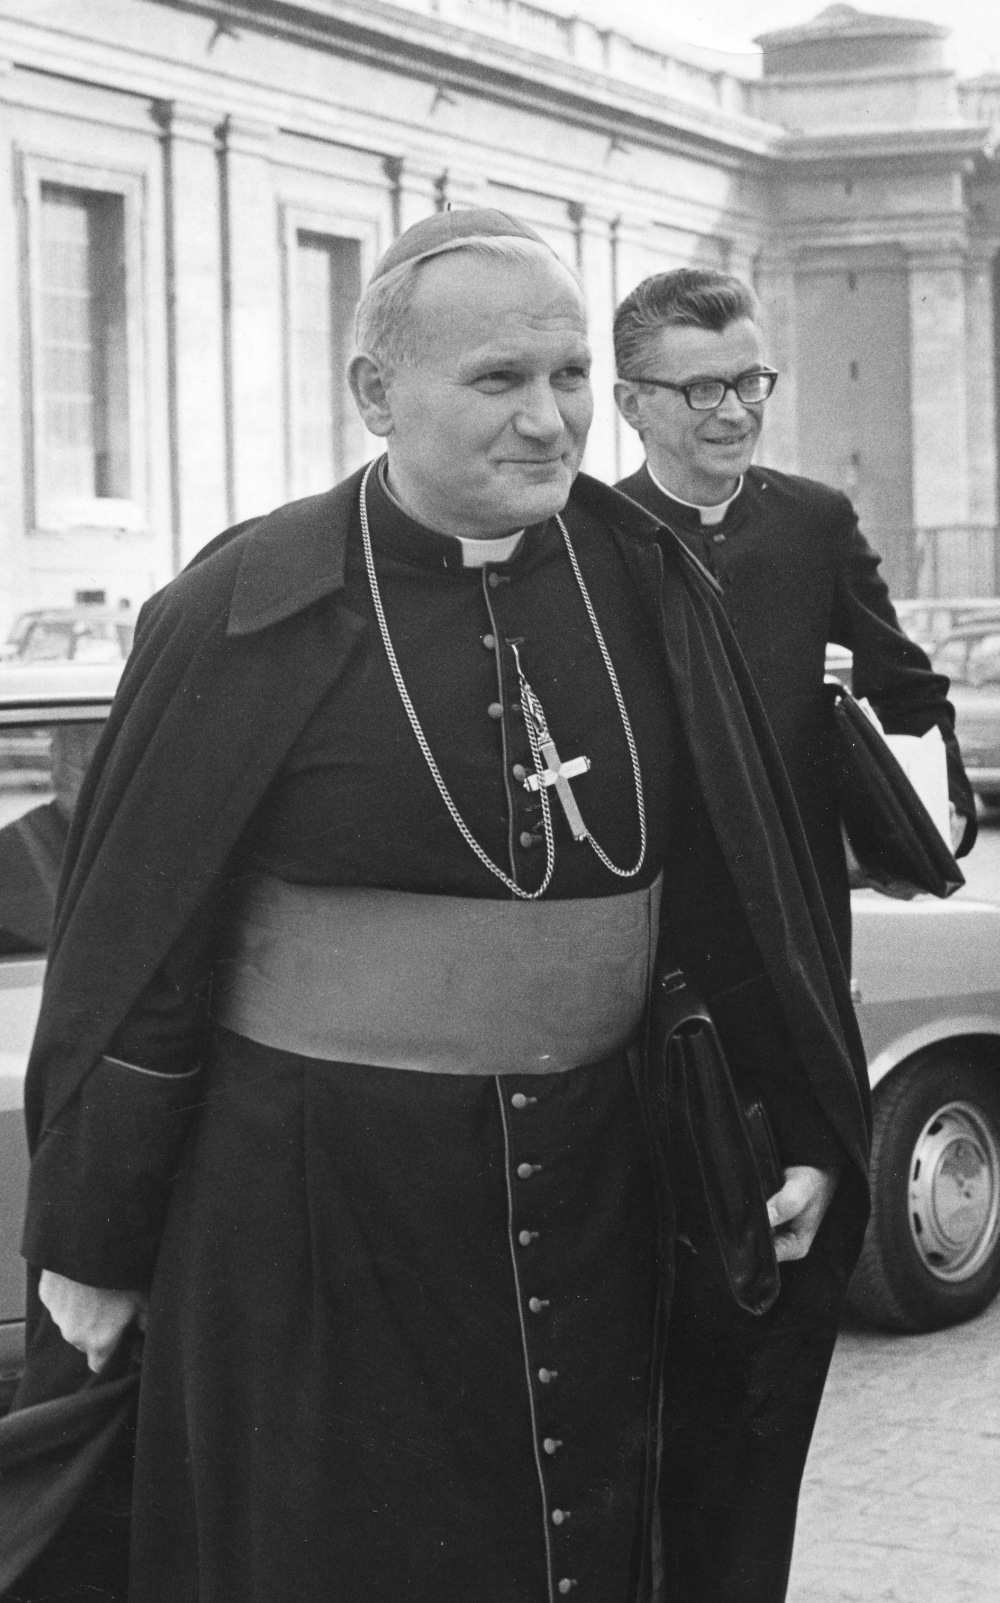 Black and white photo of Cardinal Karol Wojtyla (who later became Pope John Paul II) with a priest in the background